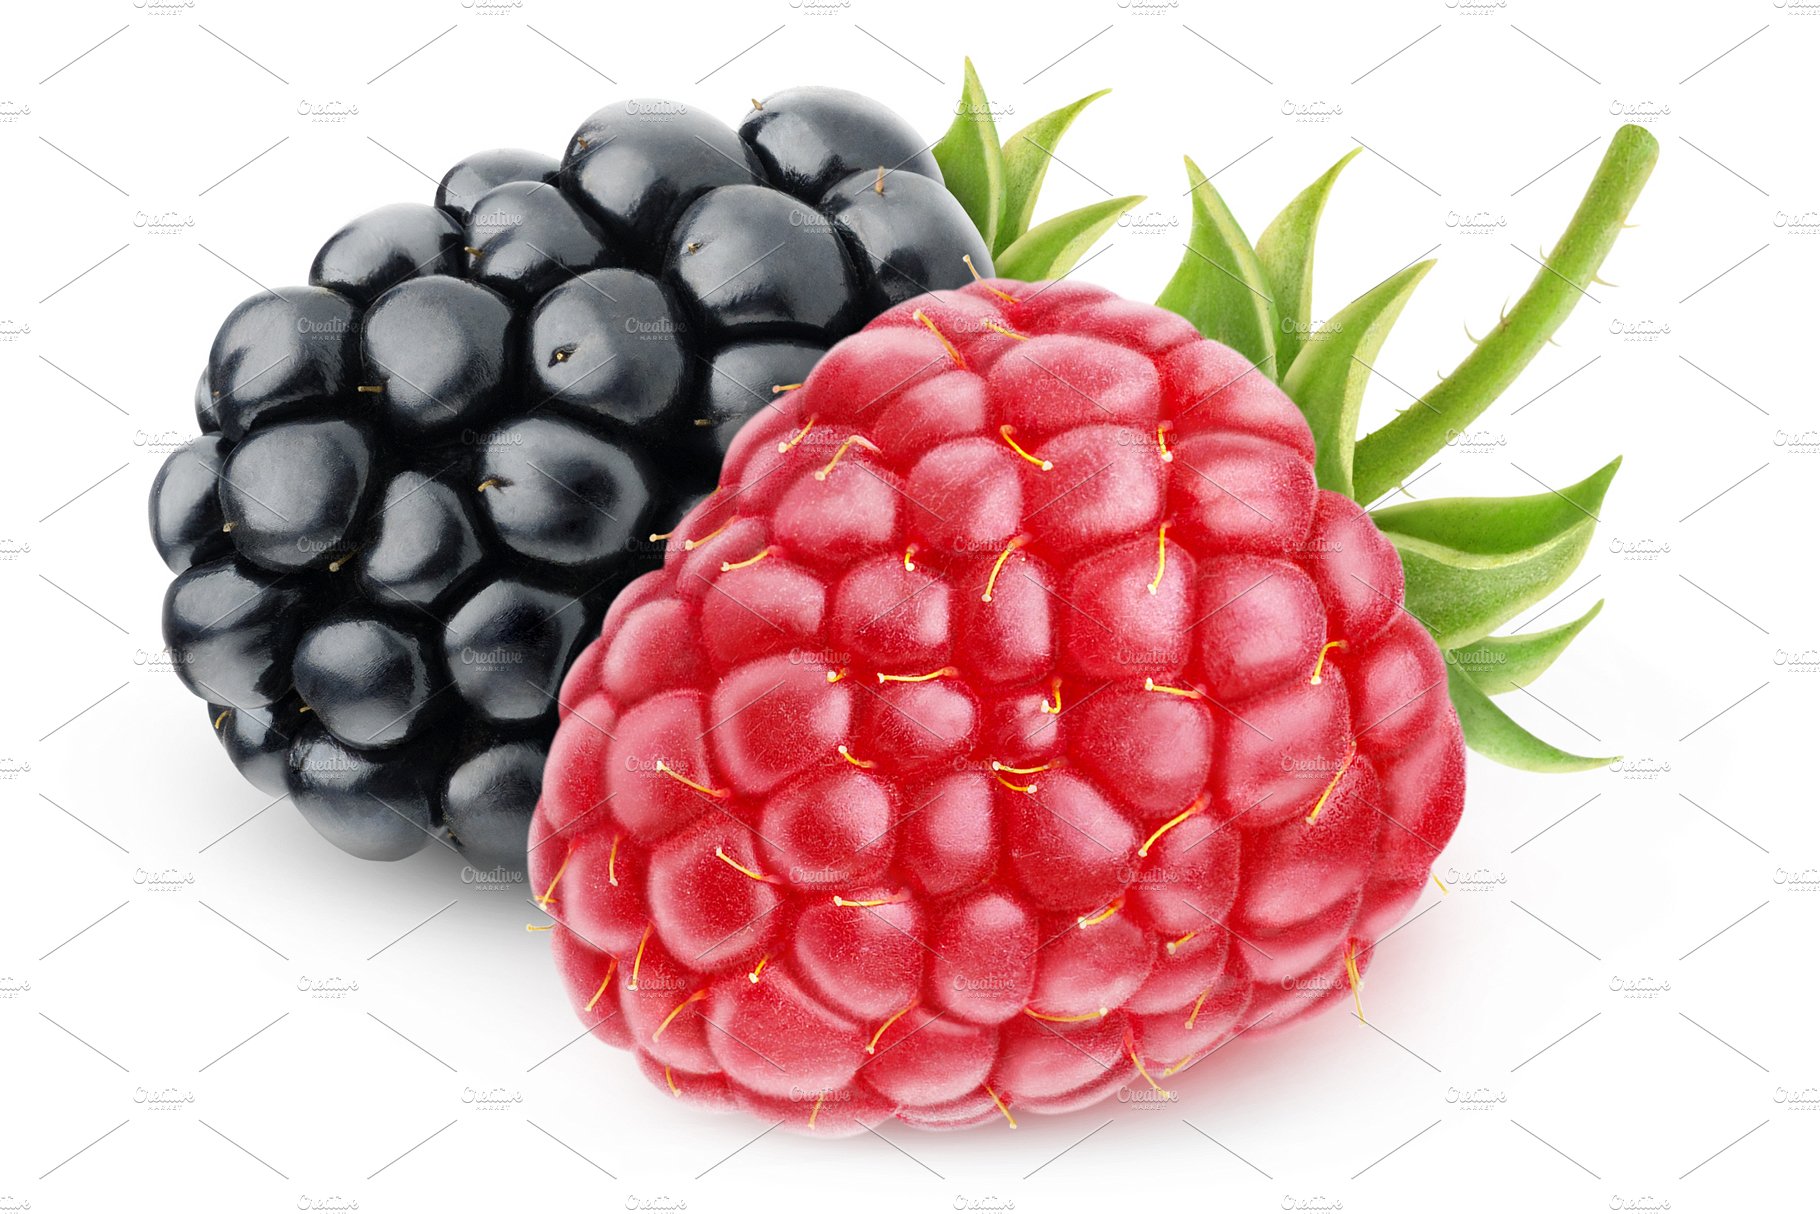 Raspberry and blackberry cover image.